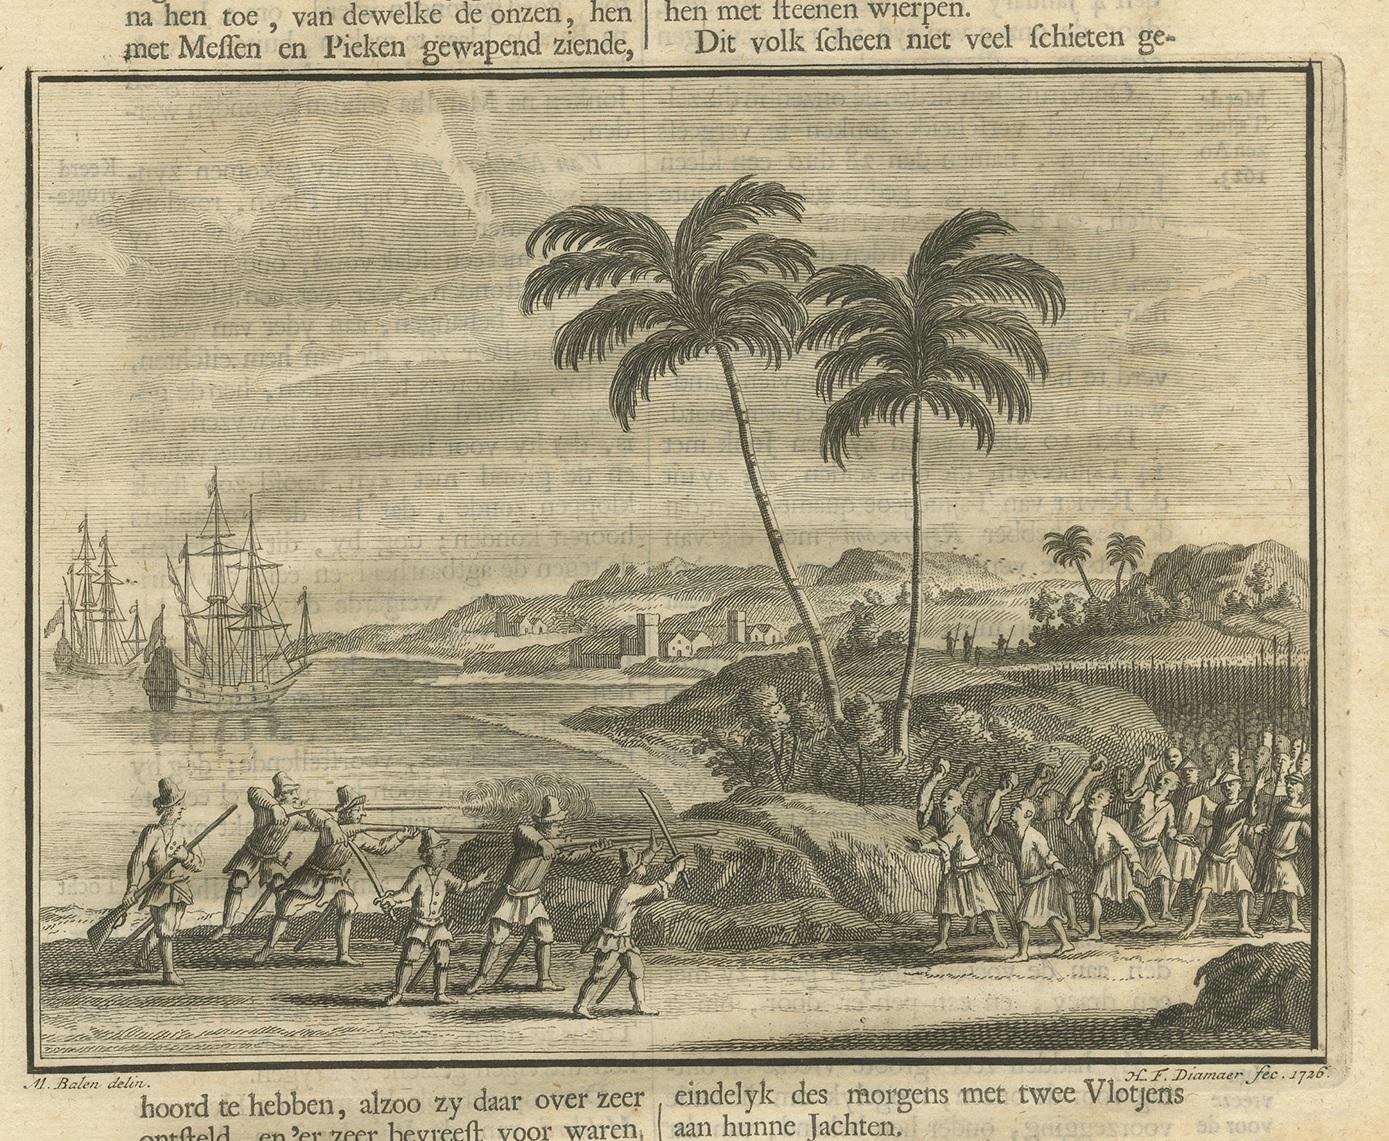 Untitled print of the Dutch arriving and pointing their guns at Chinese natives, armed with rocks, knifes and spears. Text on verso. This print originates from 'Oud en Nieuw Oost-Indiën' by F. Valentijn.